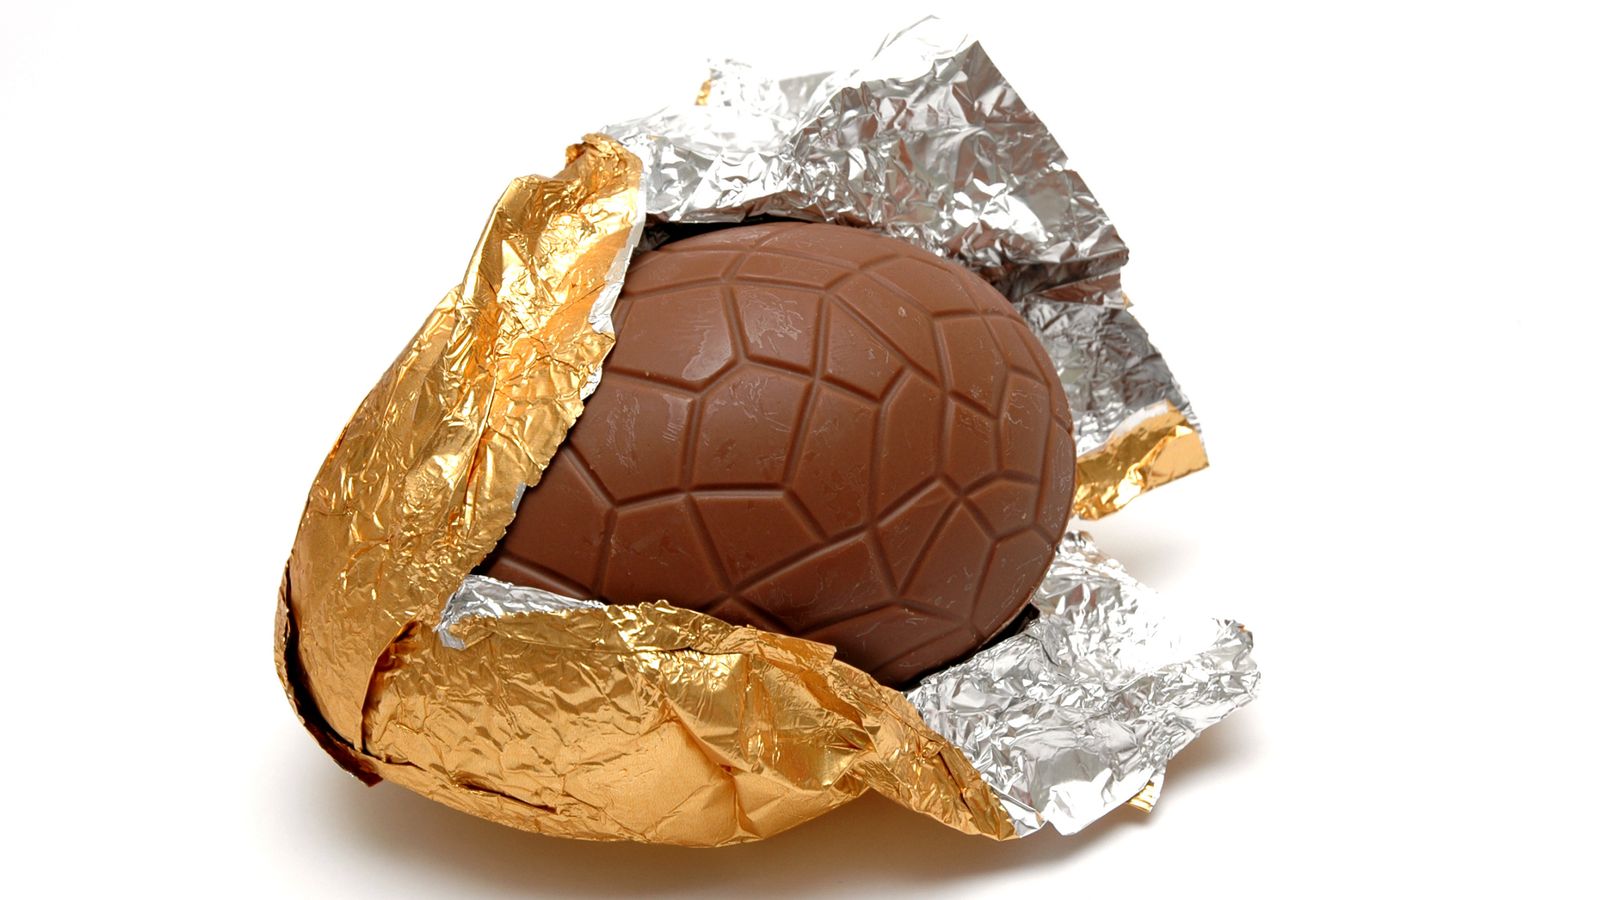 Do not eat a whole Easter egg in one go, NHS doctor urges